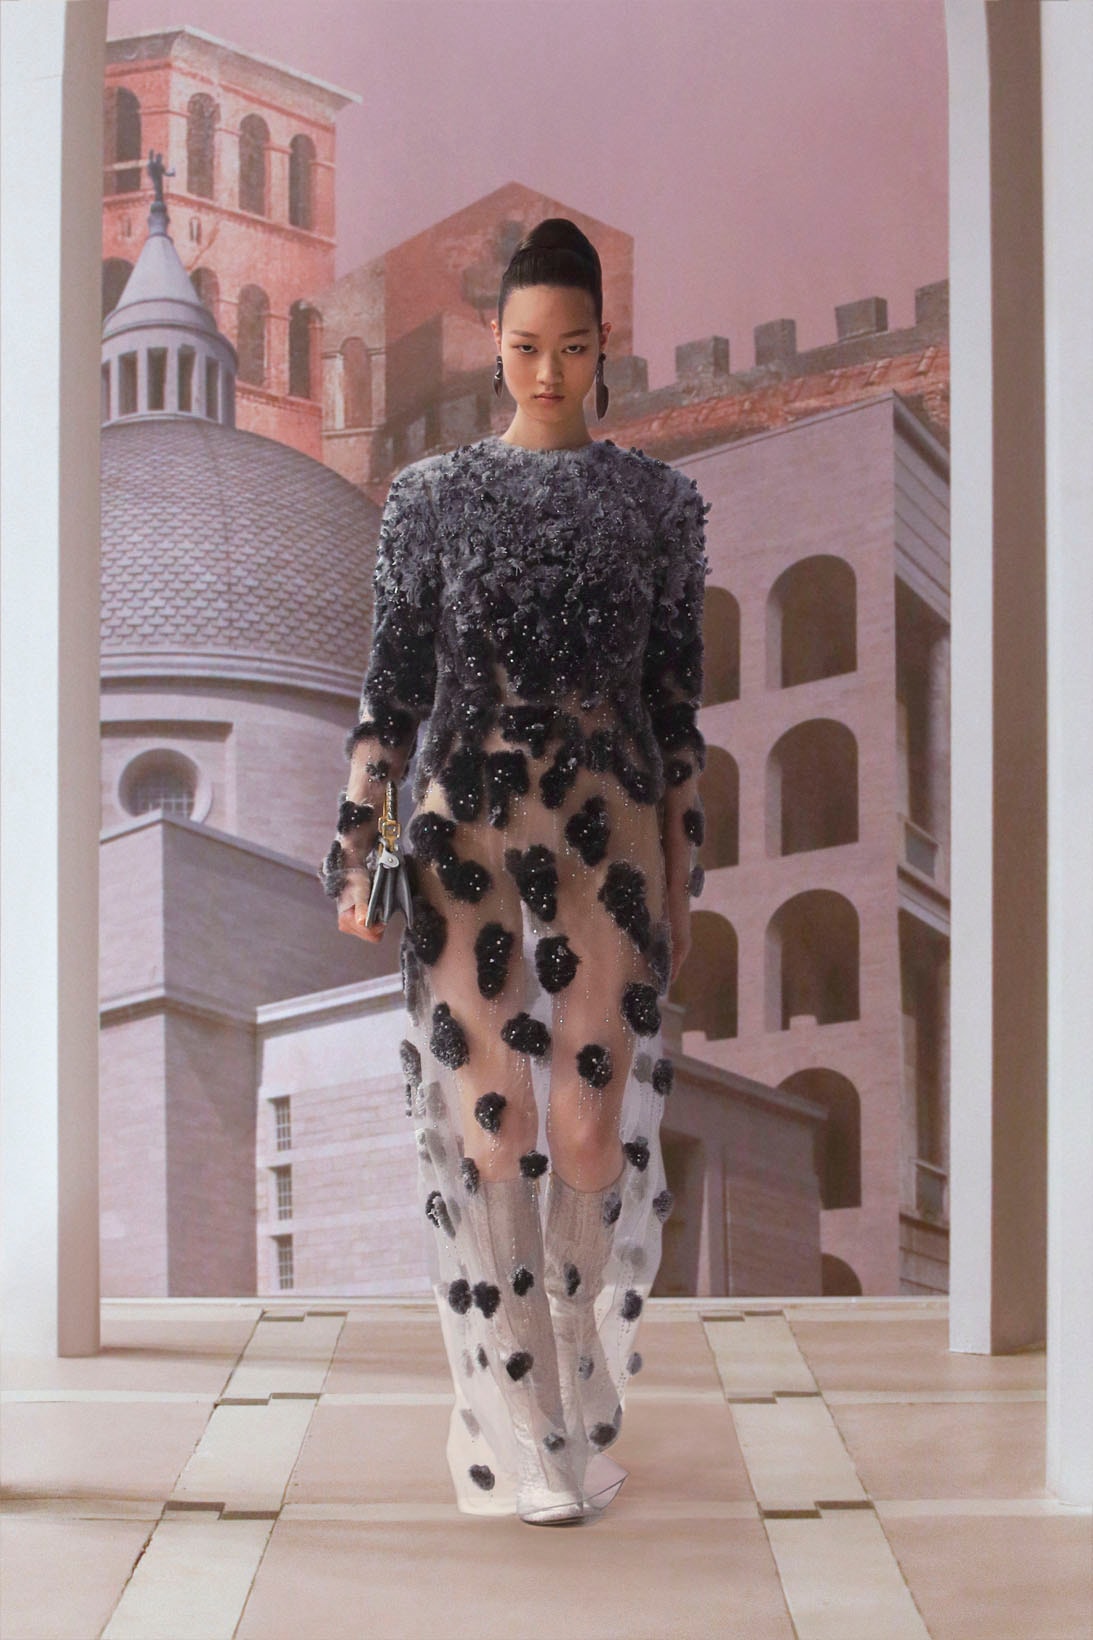 fendi kim jones fall winter couture collection runway rome italy kate moss watch 